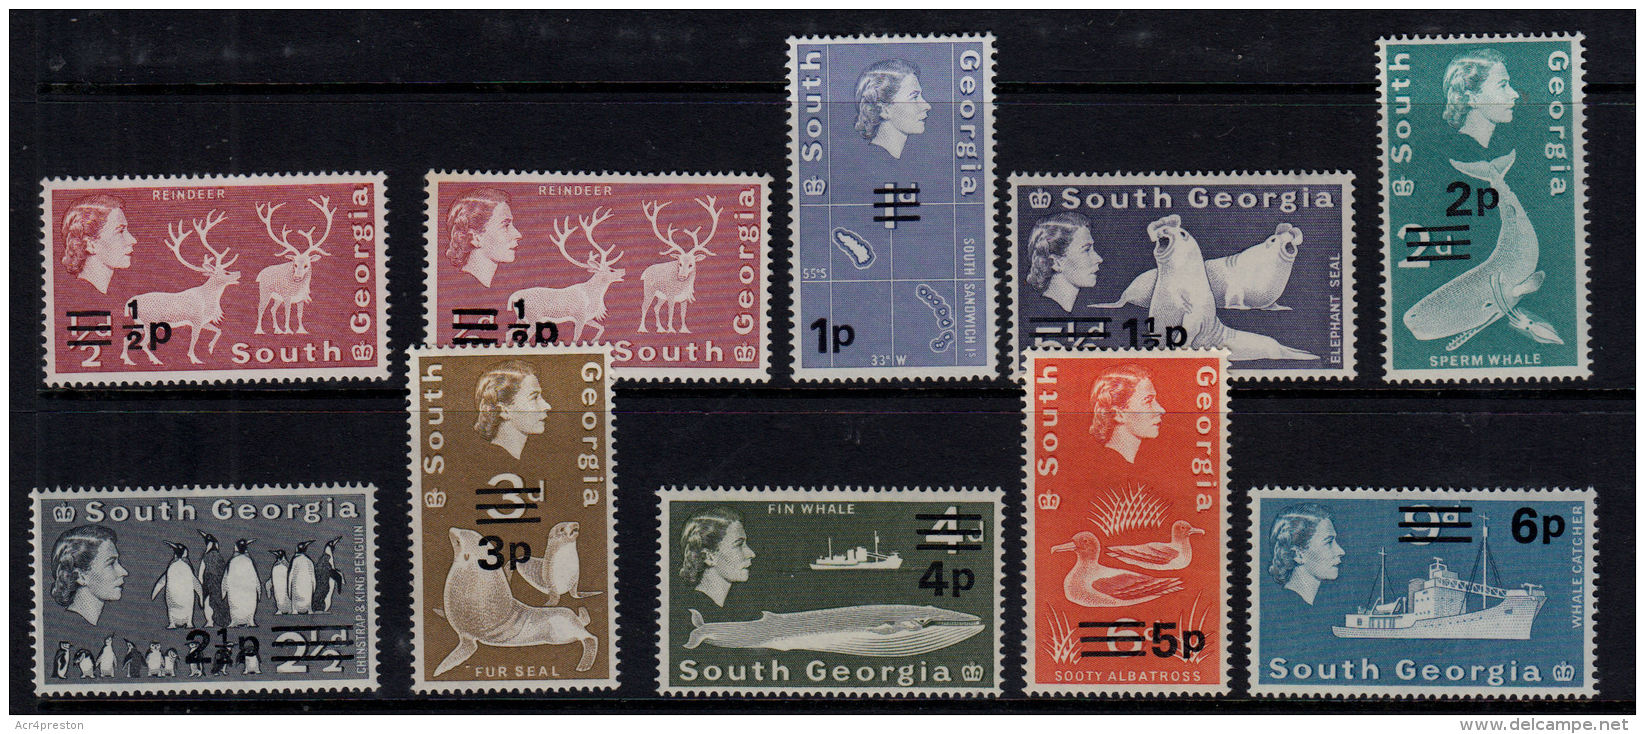 J0051 SOUTH GEORGIA 1971, SG 19-26, Definitives Surcharged, Part Series To 6p (both Types Of &frac12; P), MNH - South Georgia